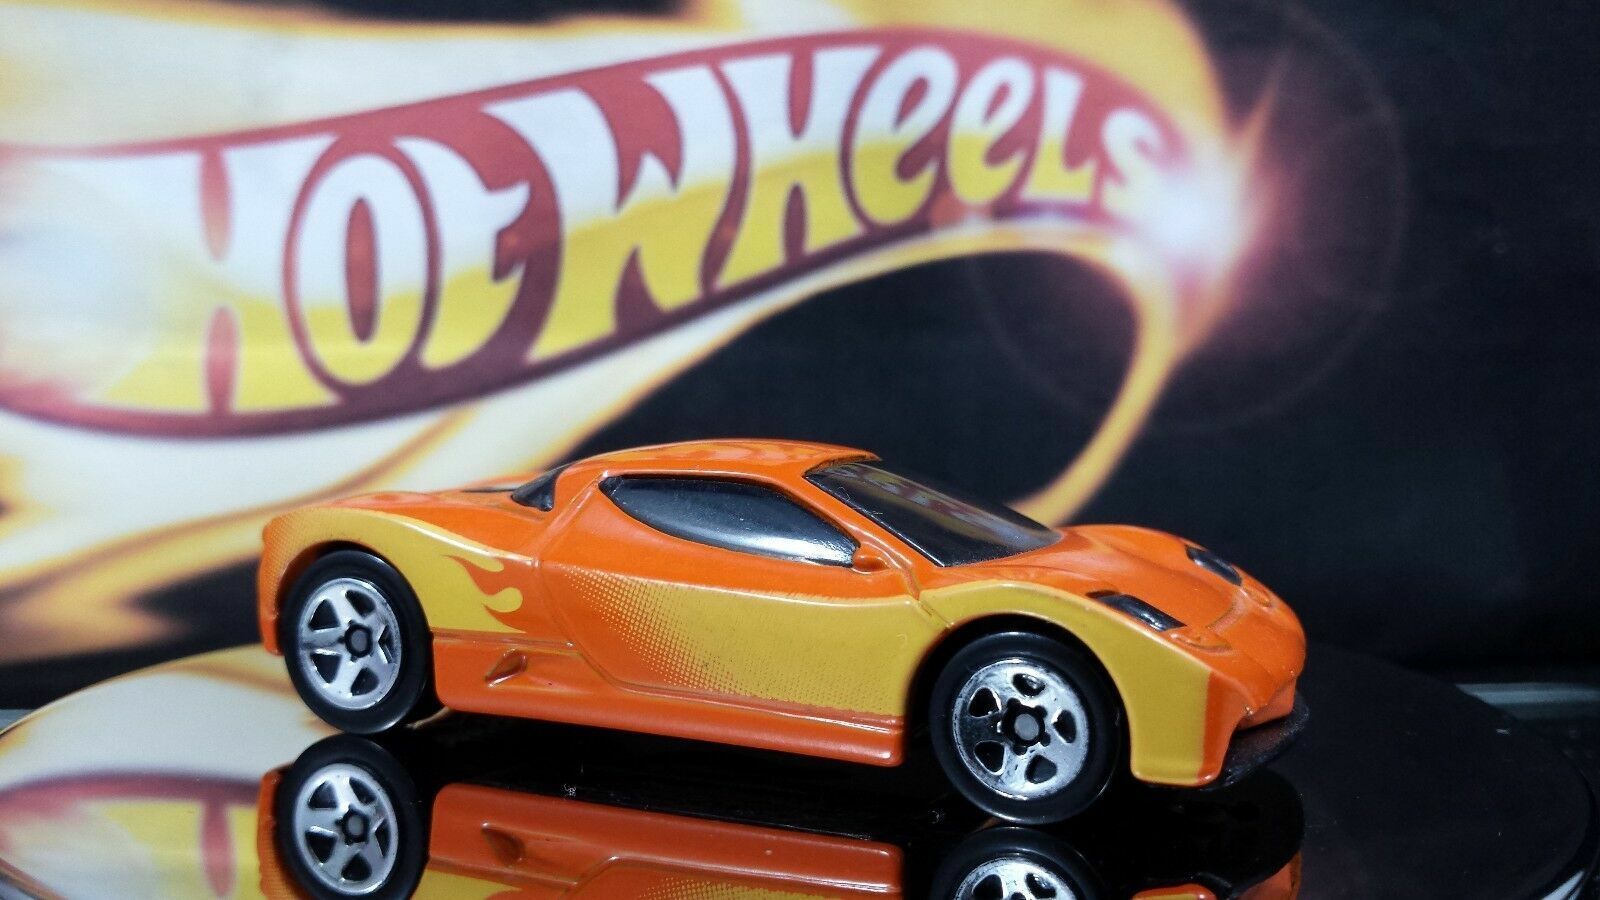 HOT WHEELS MYSTERY  ACURA HSC CONCEPT LOOSE ORANGE WITH FLAMES